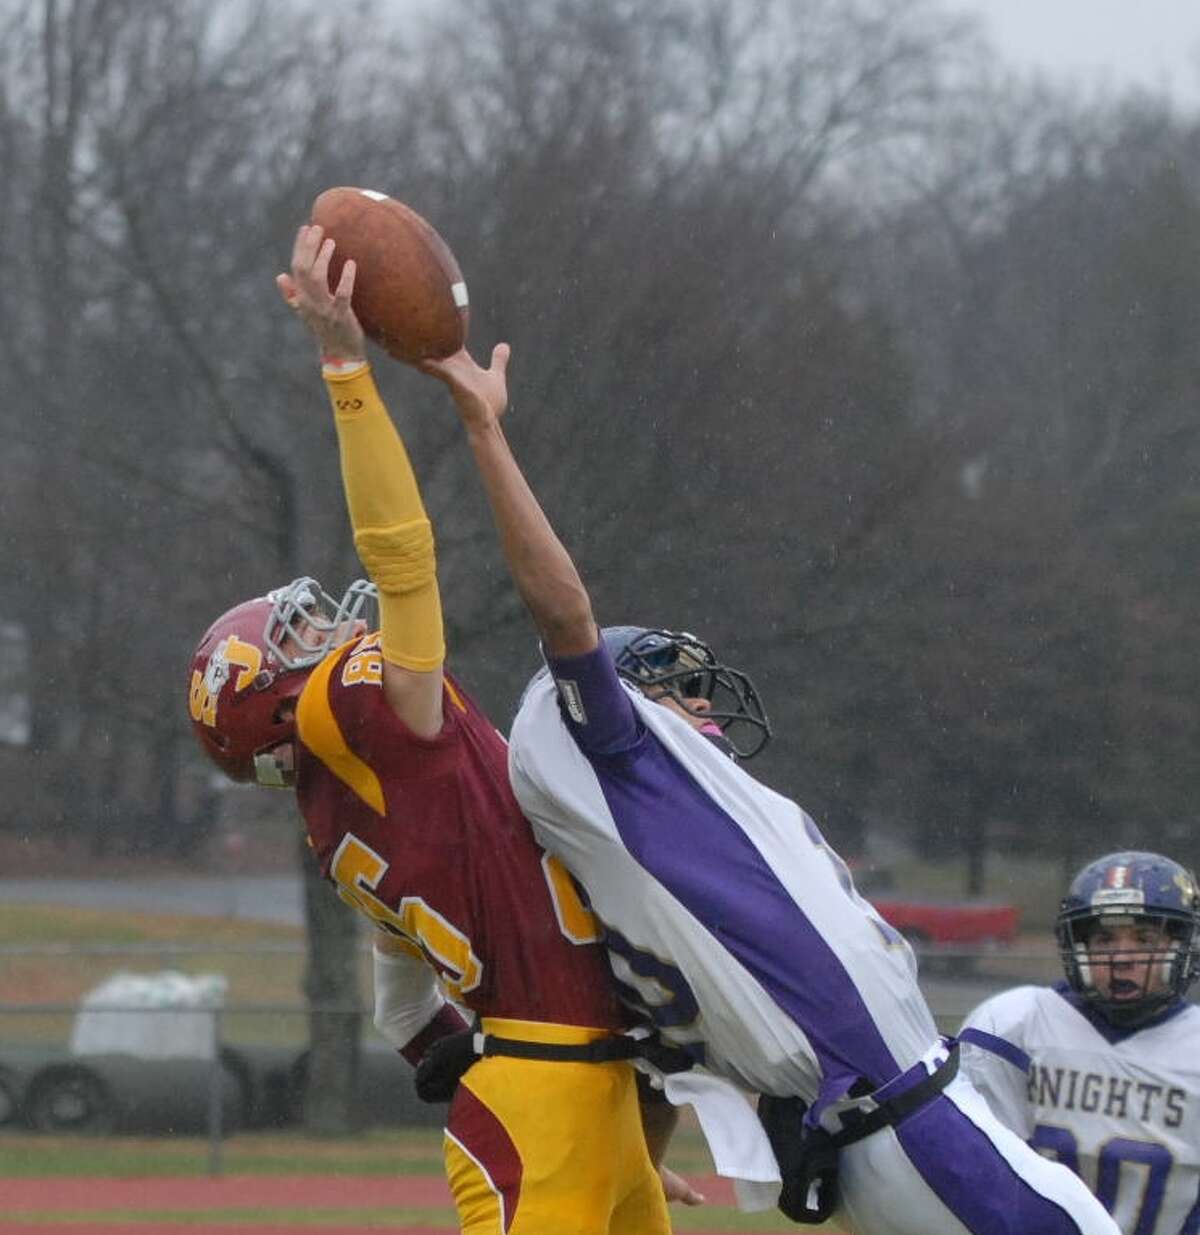 St. Joseph and Ellington/Somers battle for the ball Saturday at Trumbull. Photo by Mary Albl